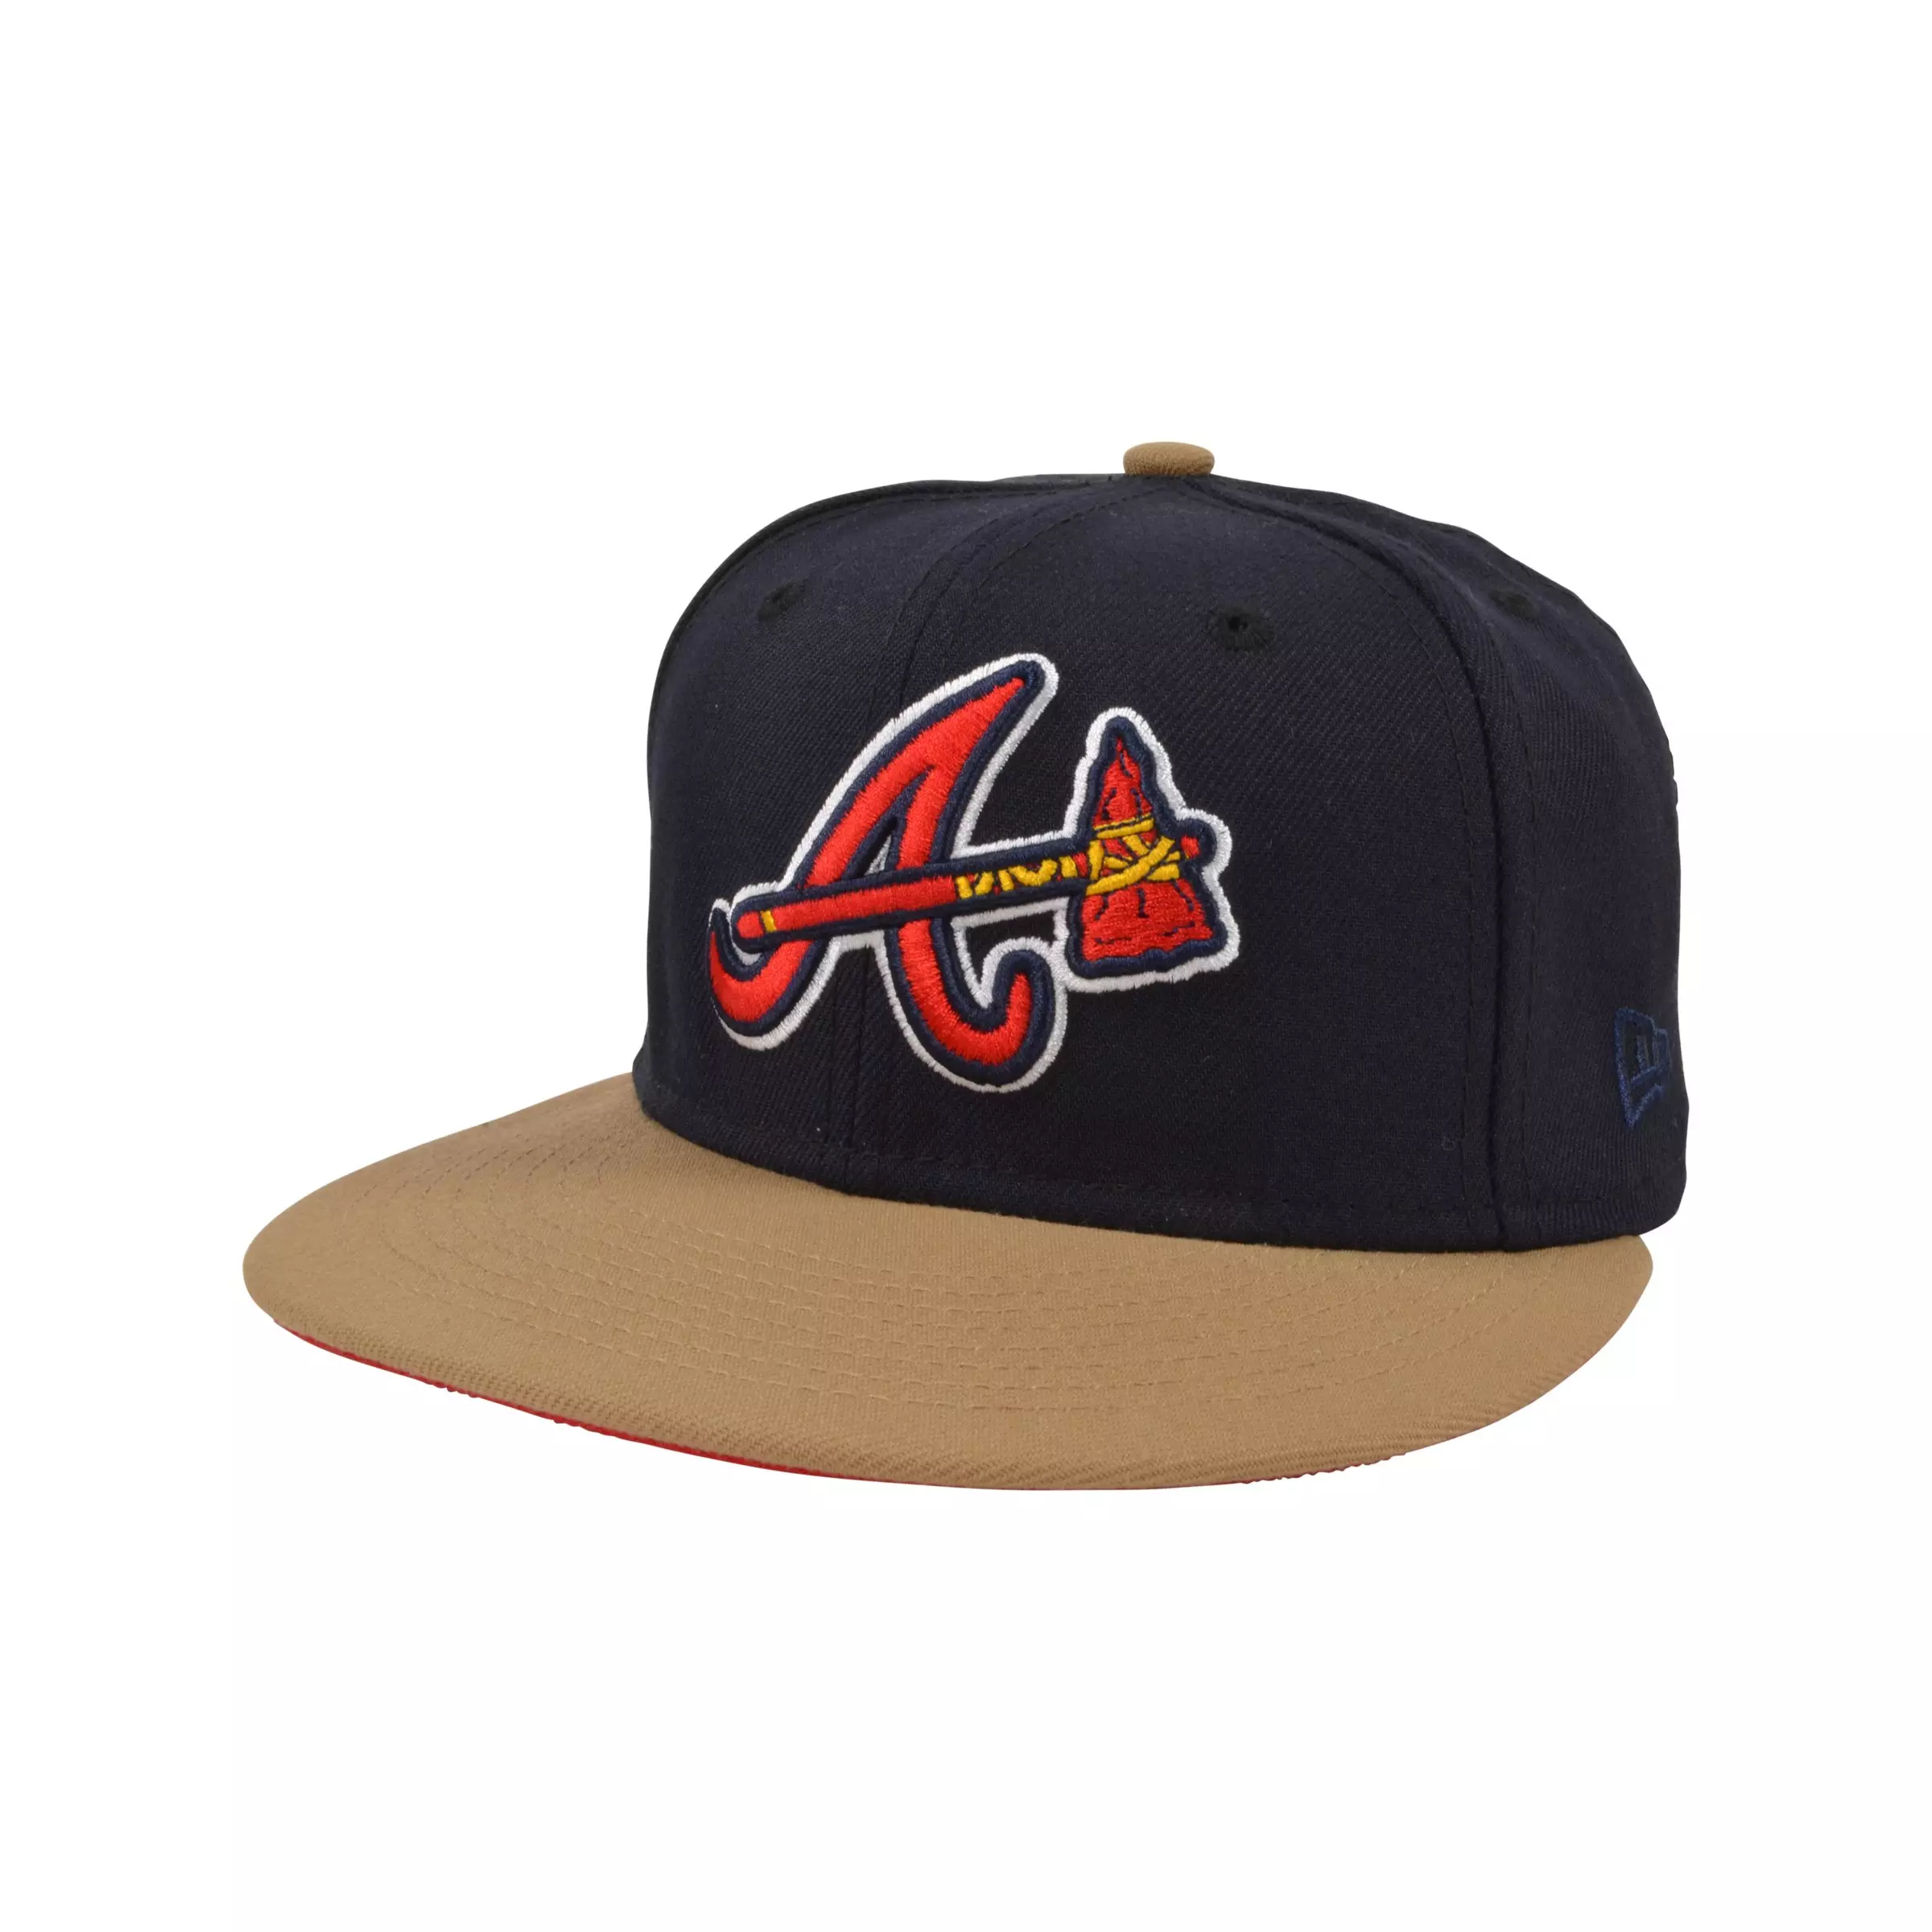 New Era Cap Myfitteds Atlanta braves Silk Road 2000 all star game patch  size 7 1/8 brand new sold out Blue - $248 (23% Off Retail) New With Tags -  From Trendy